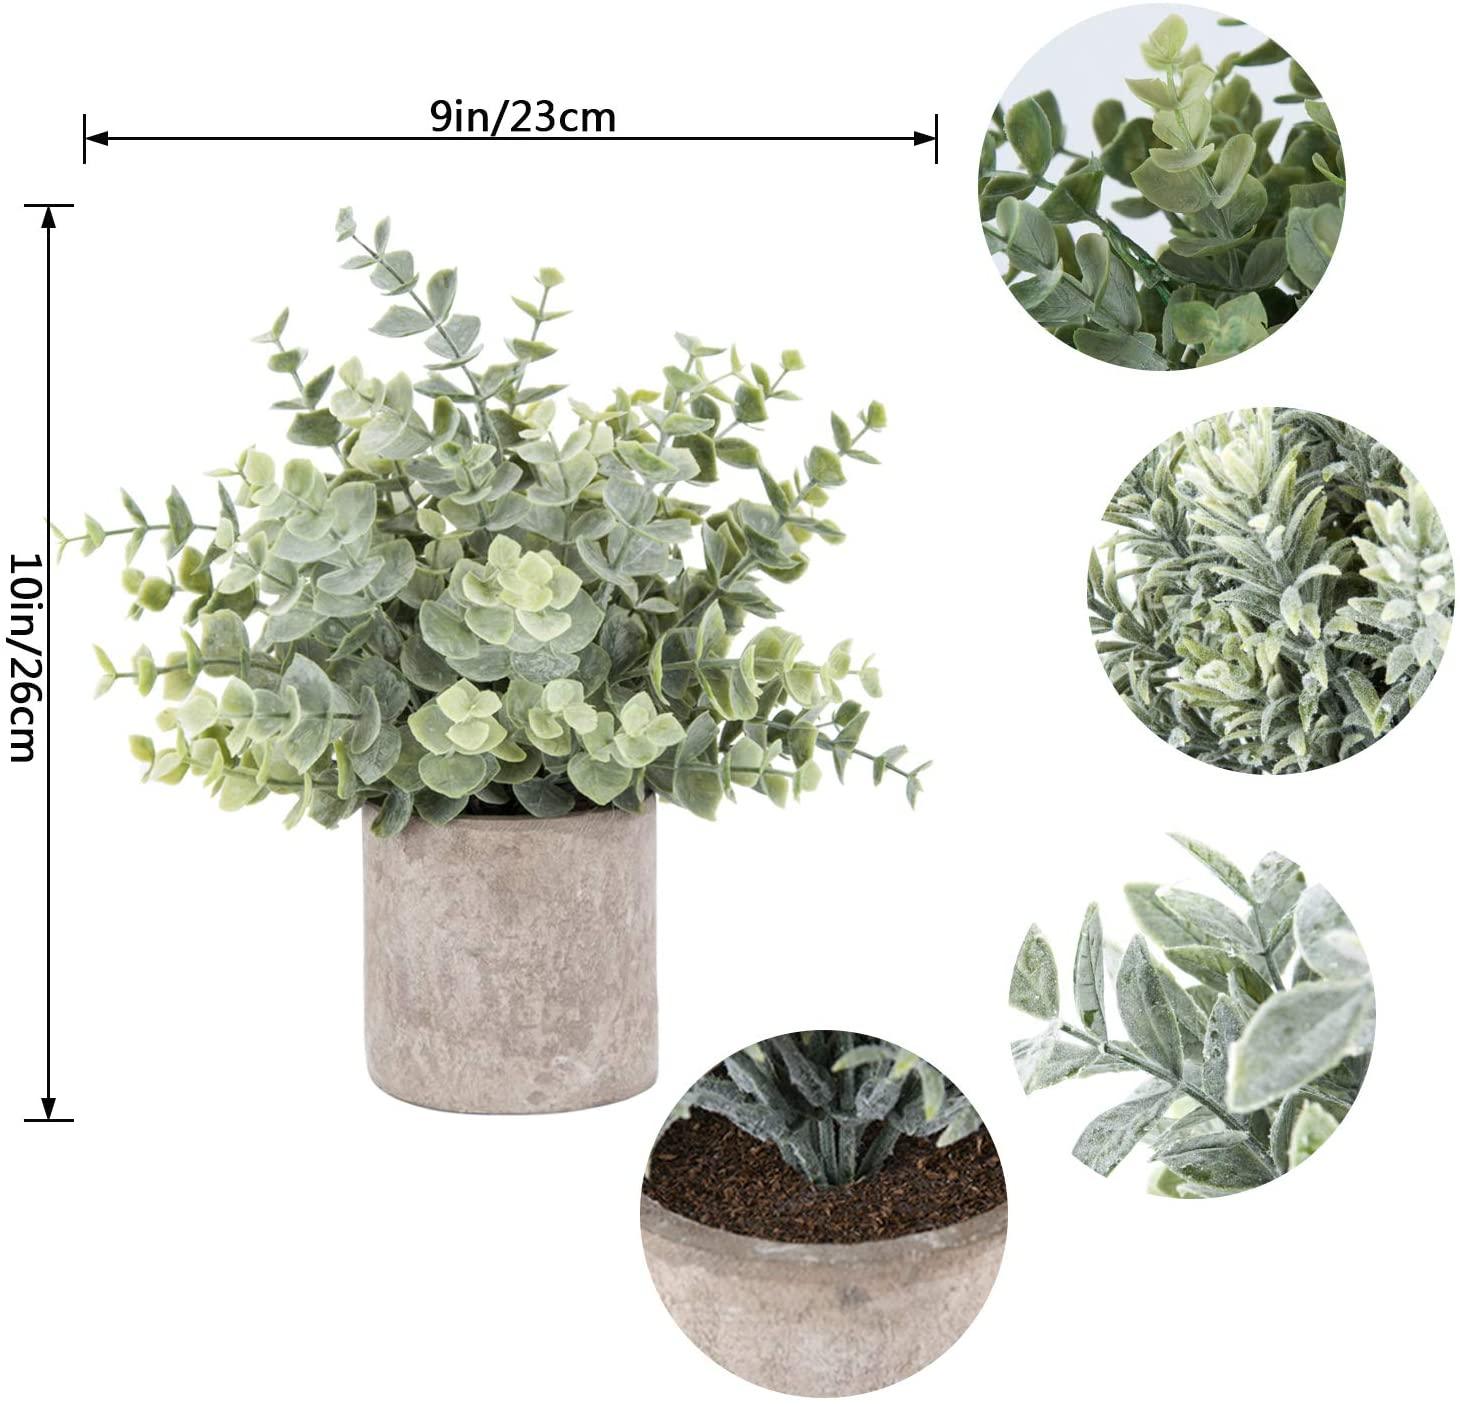 3 Pack Mini Potted Fake Plants Artificial Plastic Eucalyptus Plants for Home Office Desk Room Decoration - If you say i do